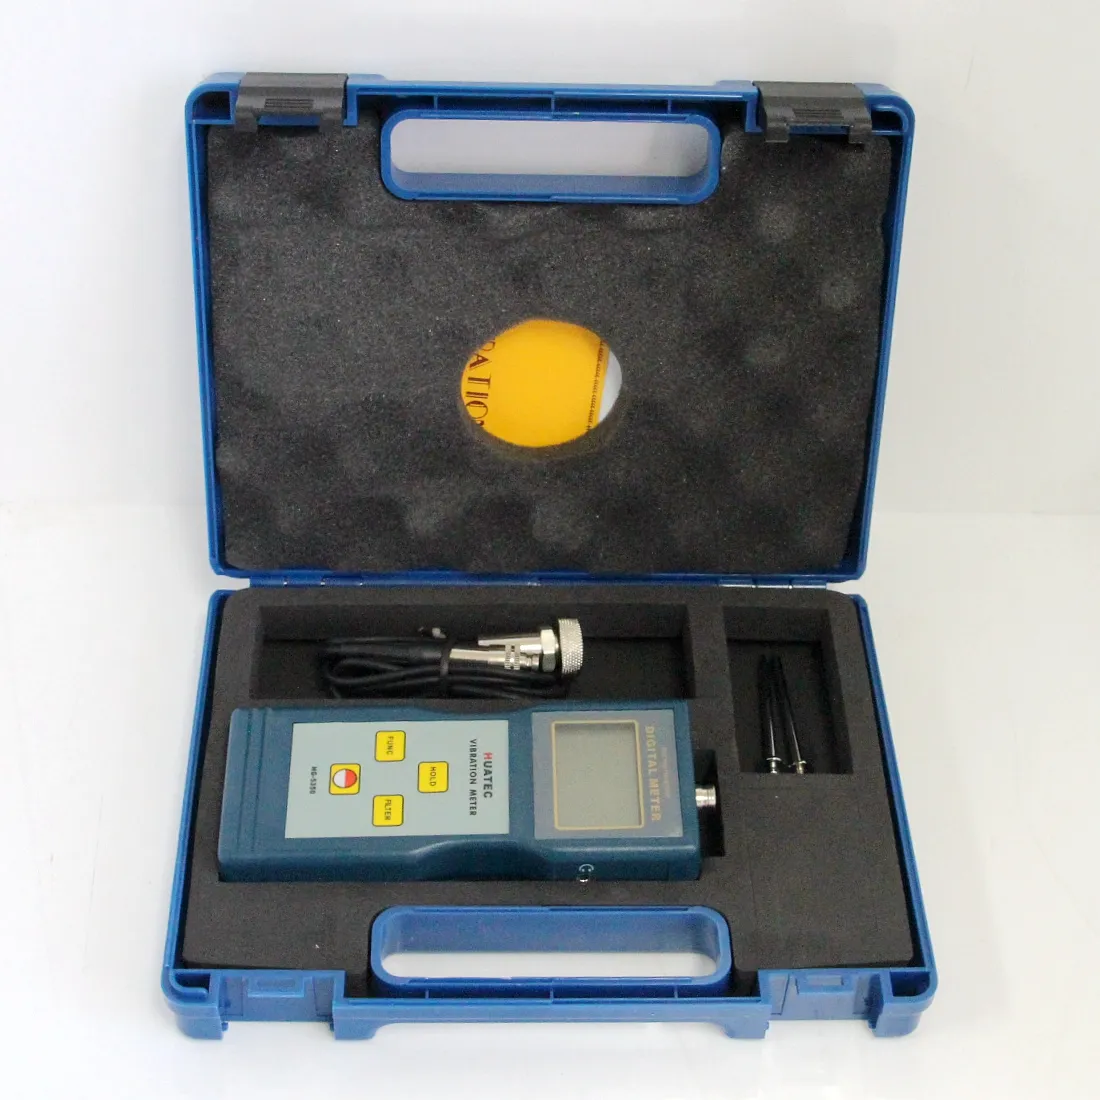 China Supply HG5350 Portable Vibration Measuring Instrument Vibration Meter With Low Battery Indicator